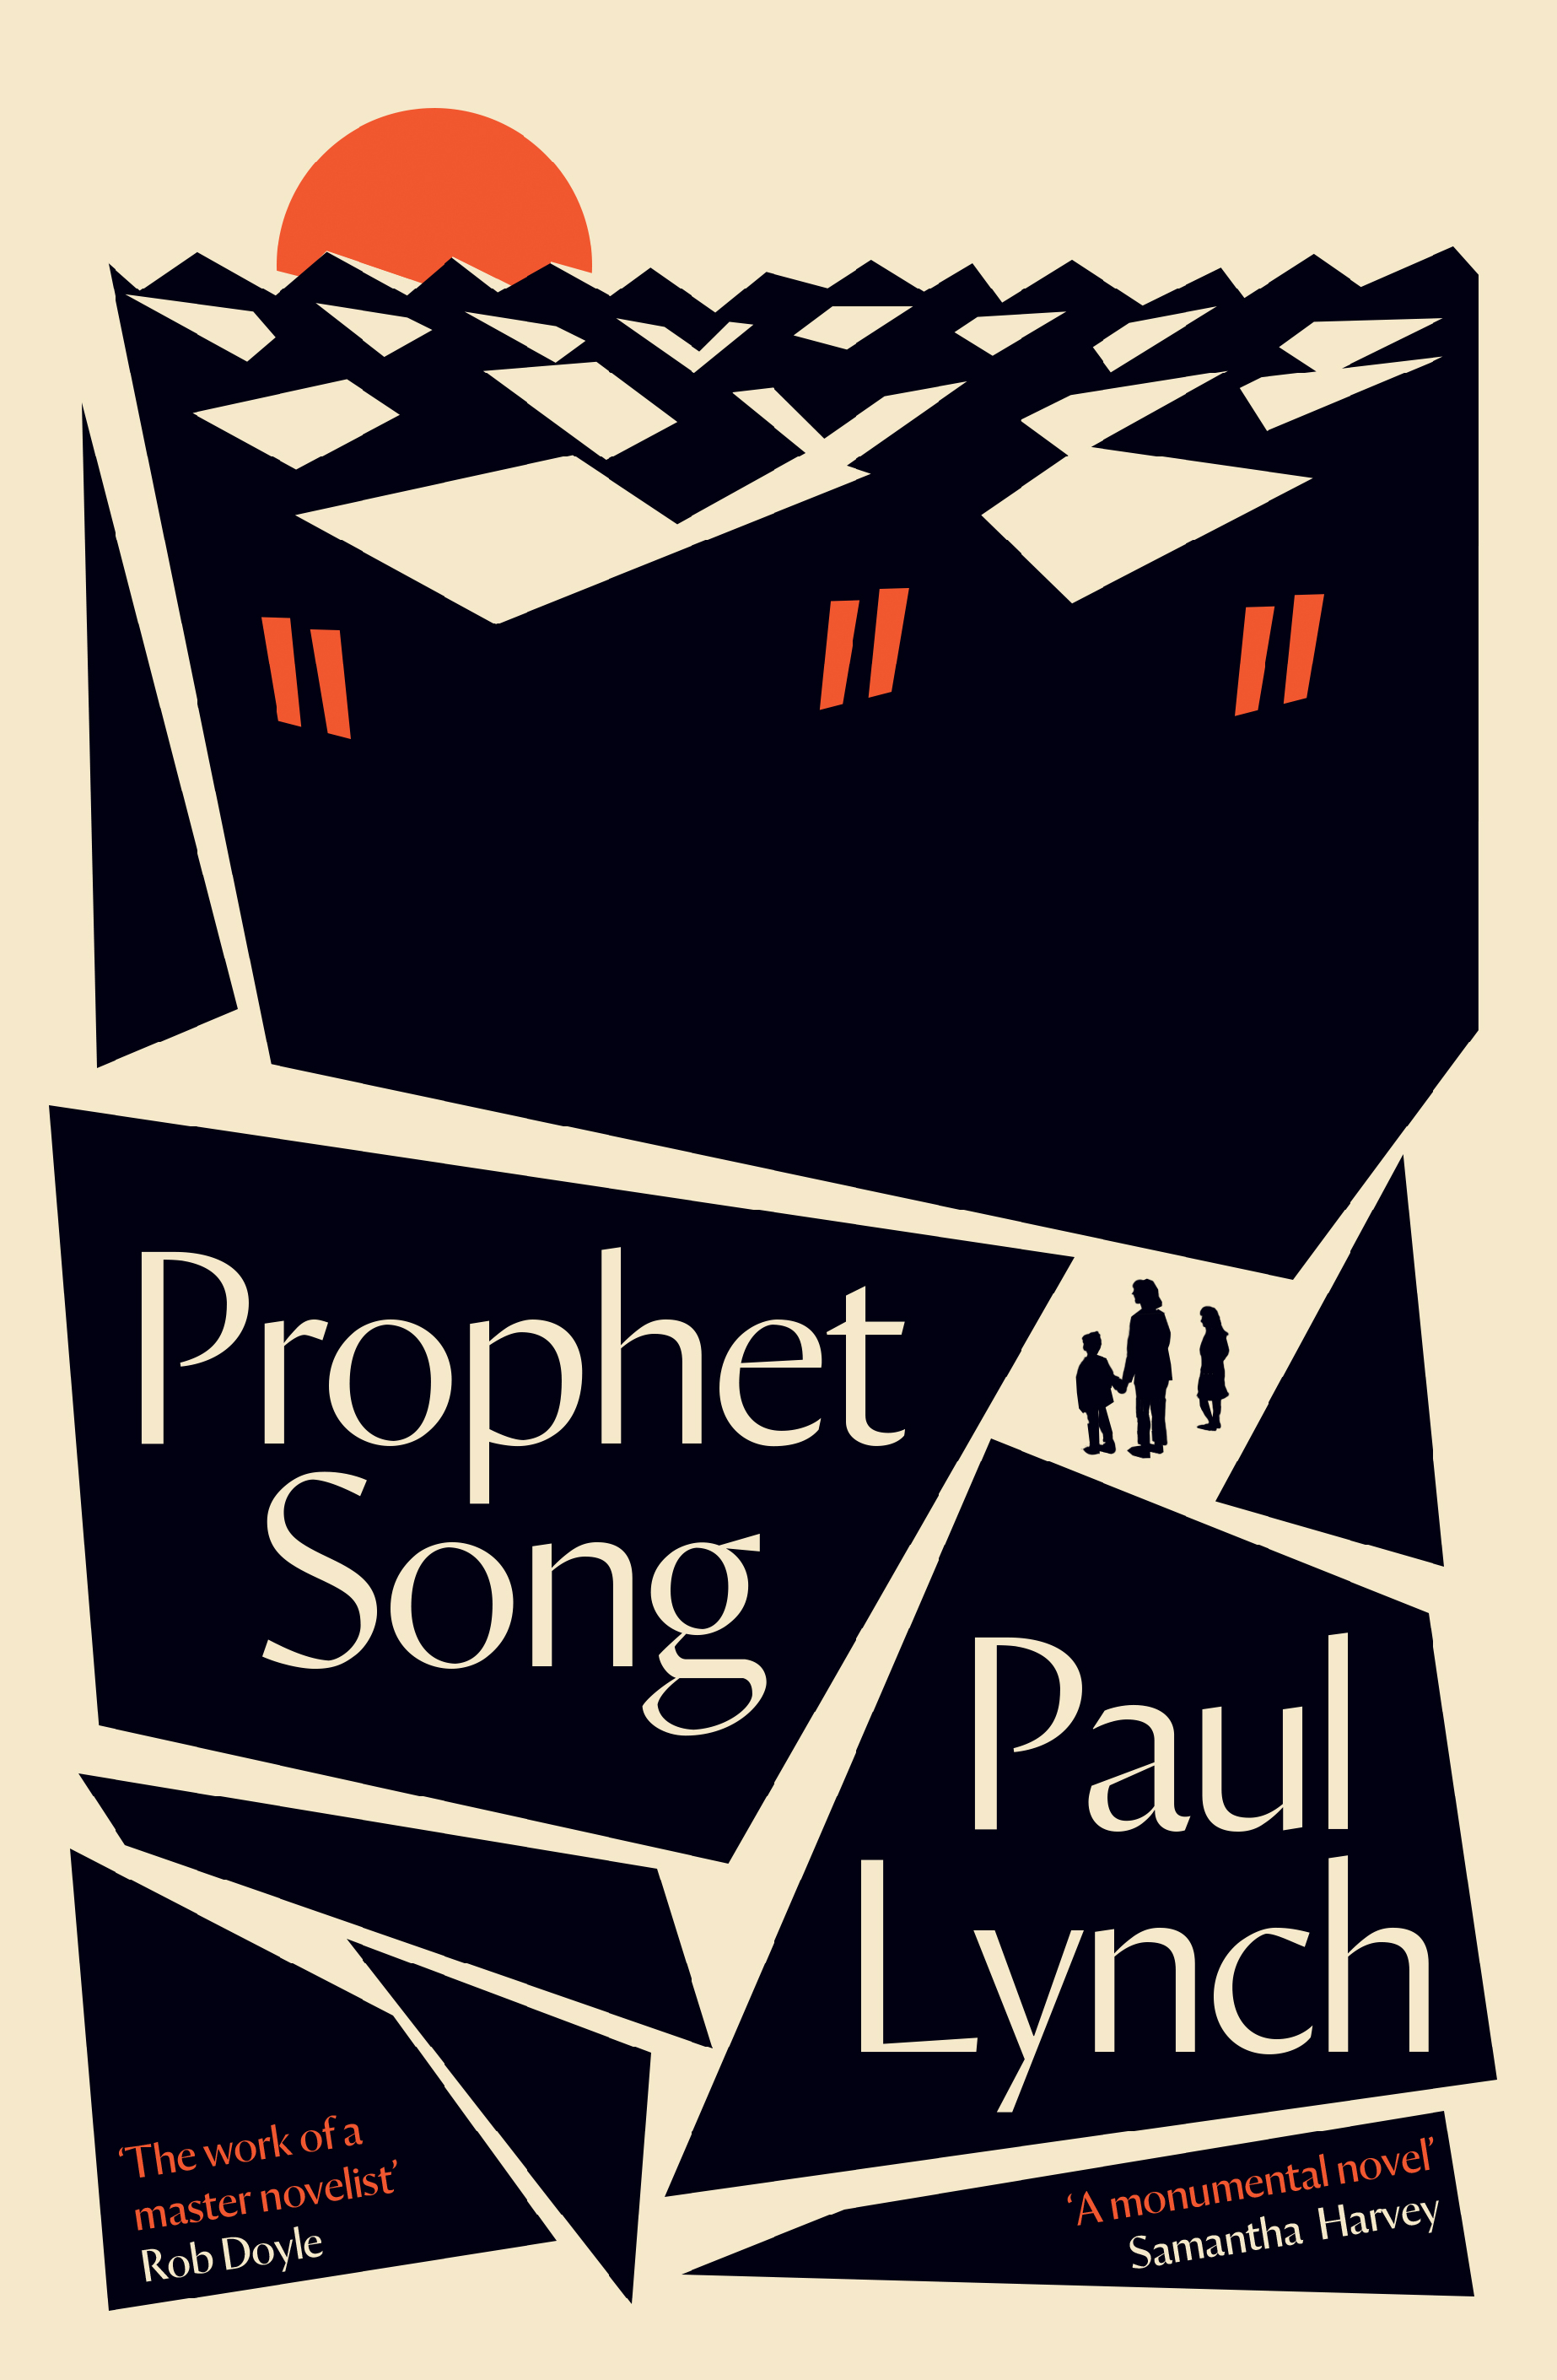 'Prophet Song' by Paul Lynch book cover. Image: Booker Prize